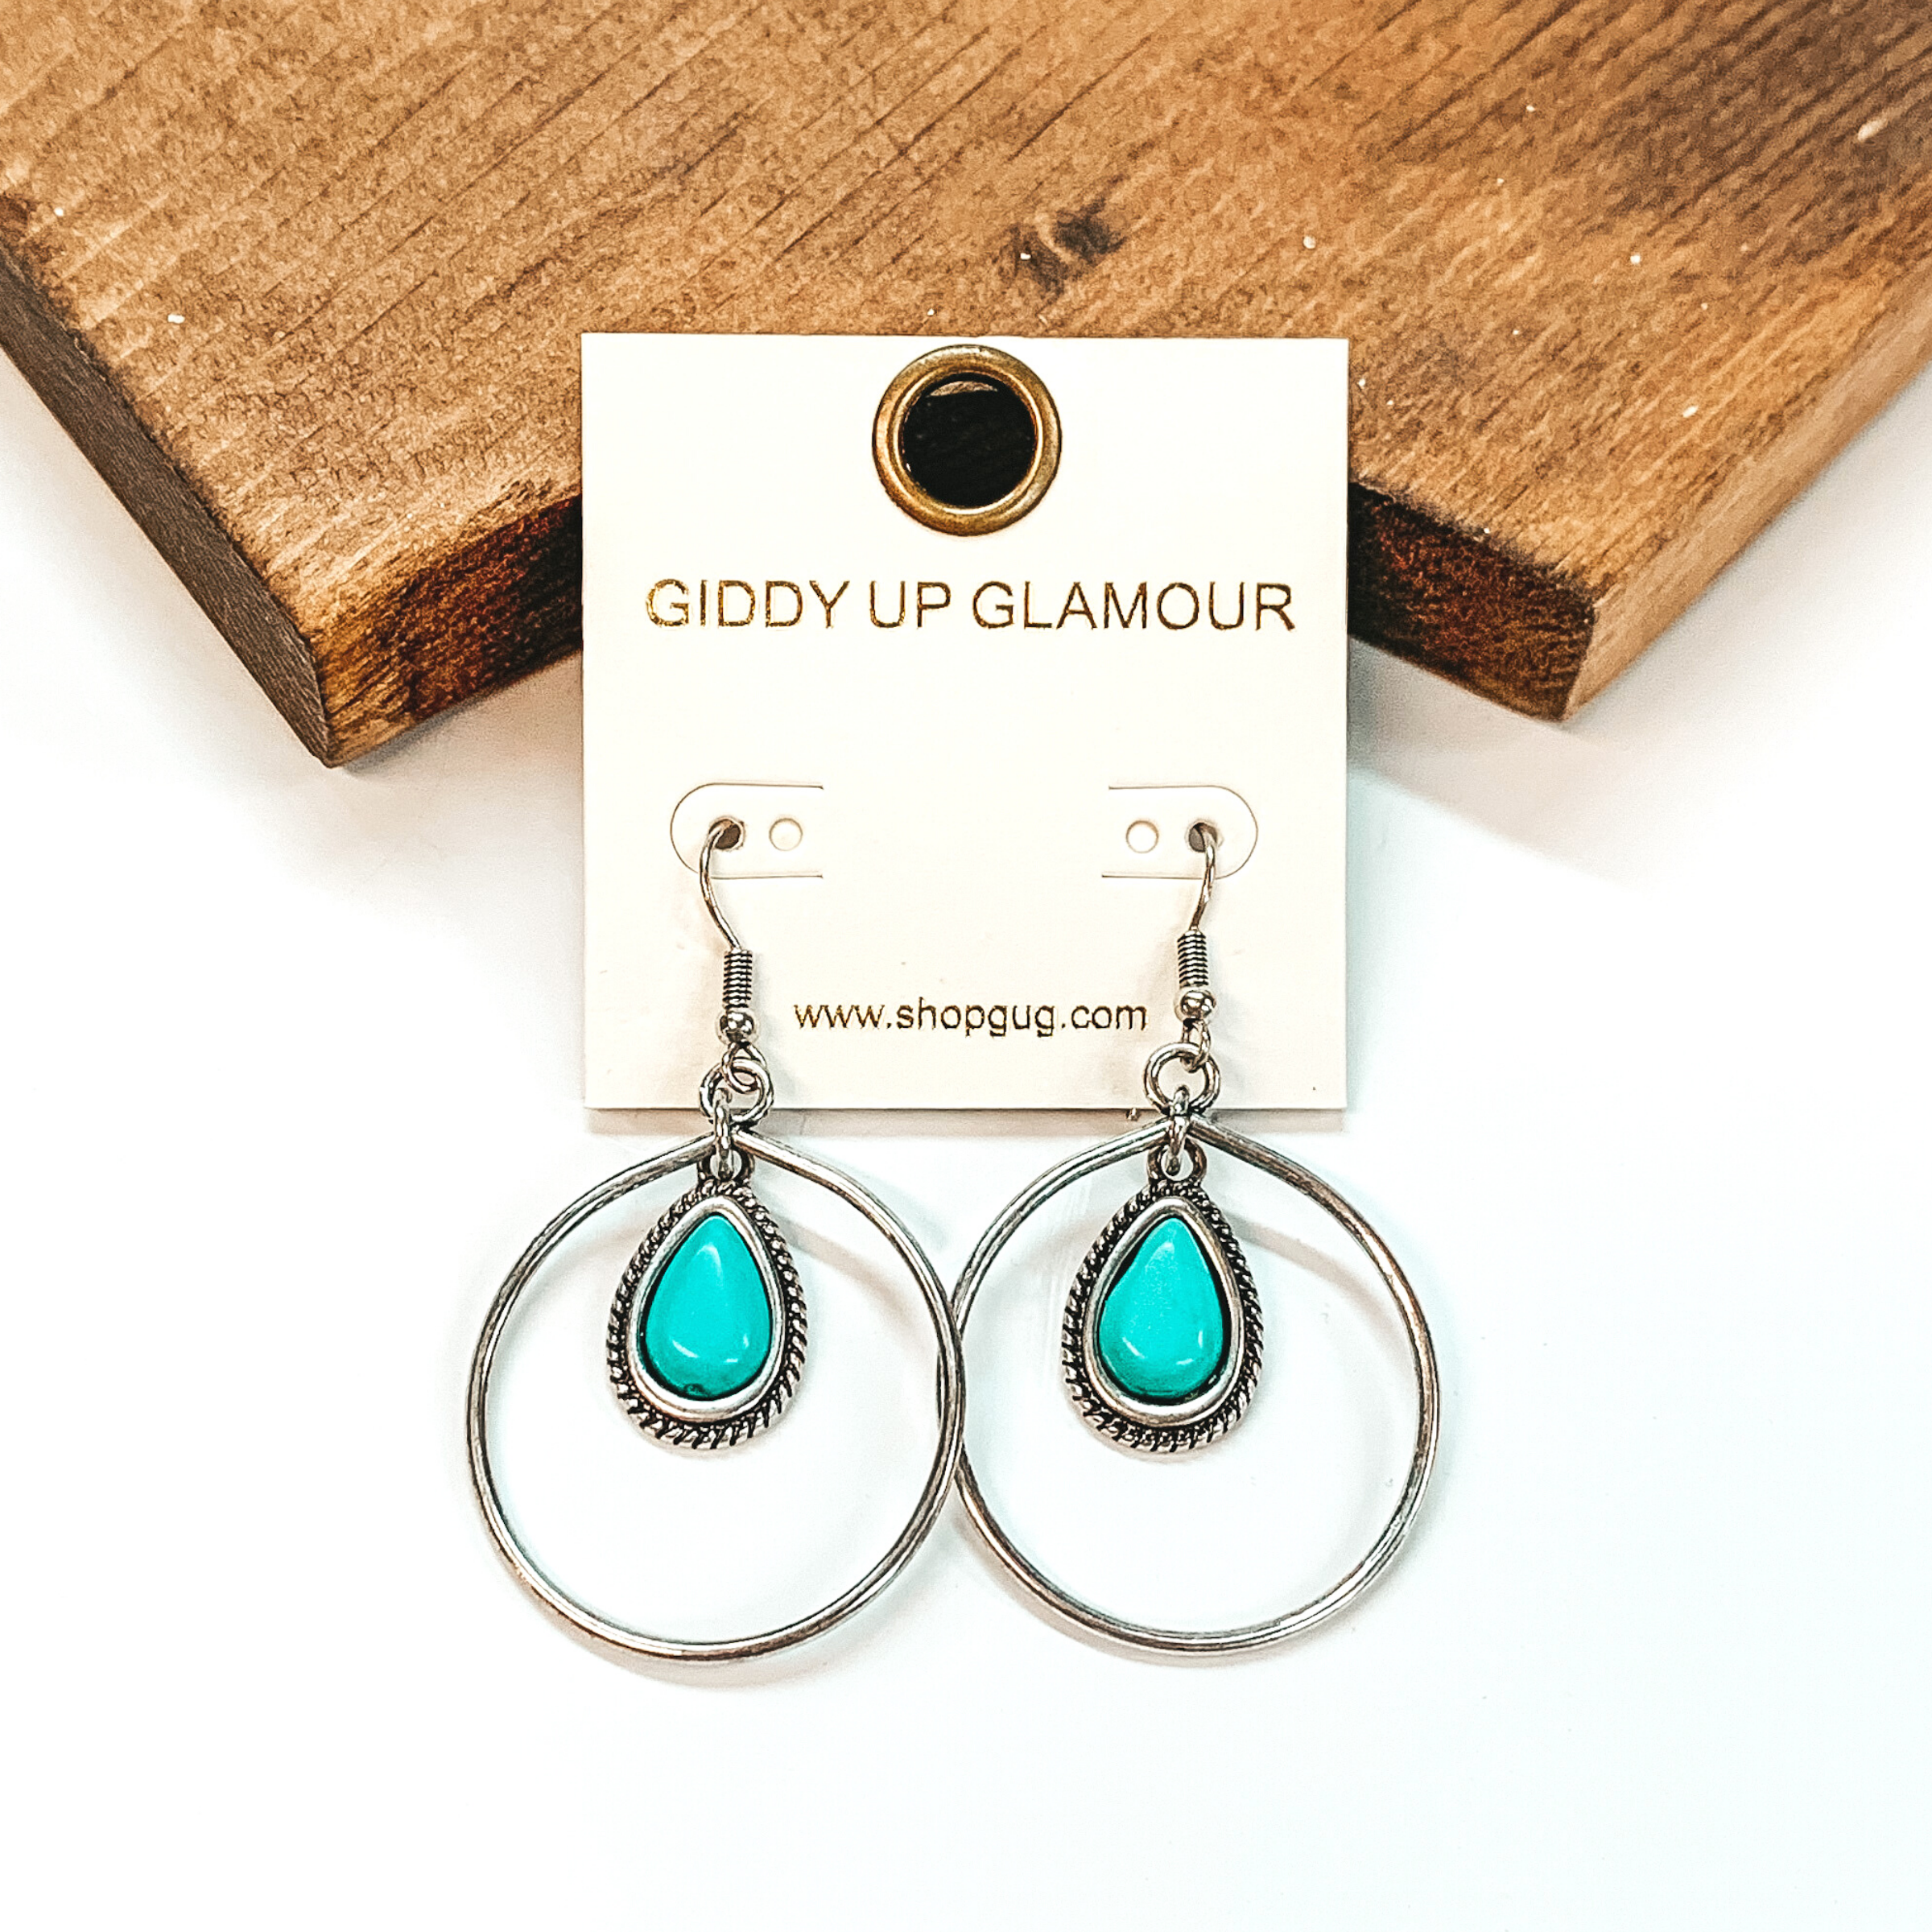 Silver fish hook earrings with a circle drop pendant. Hanging in the middle of the circle is a teardrop turquoise stone pendant. These earrings are pictured on a white background in front of a brown block.  